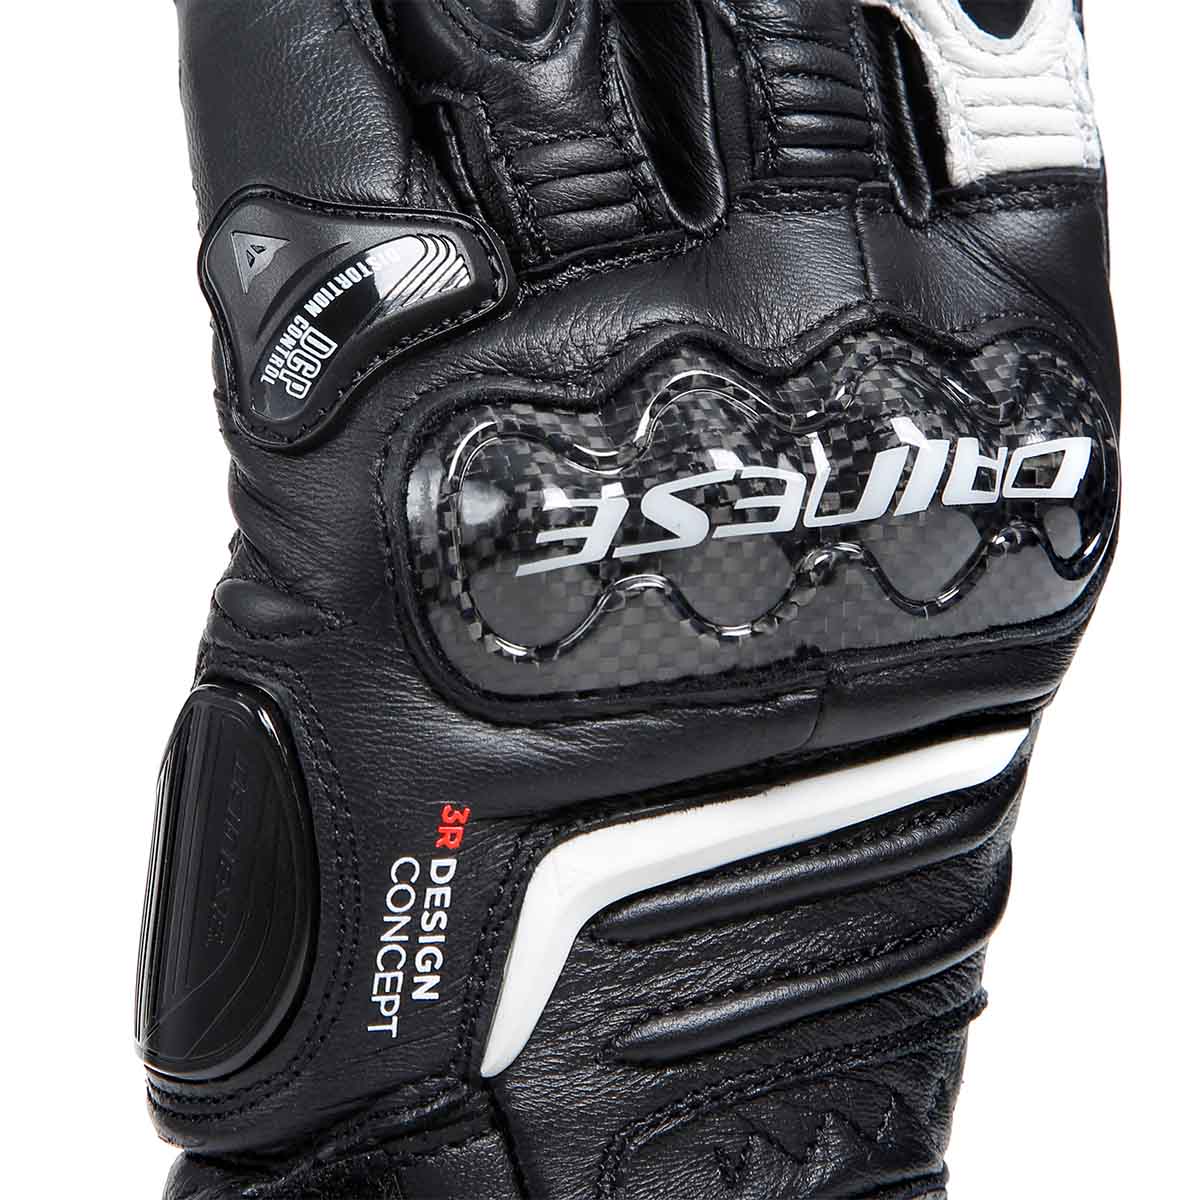 CARBON 4 LONG LADY LEATHER GLOVES